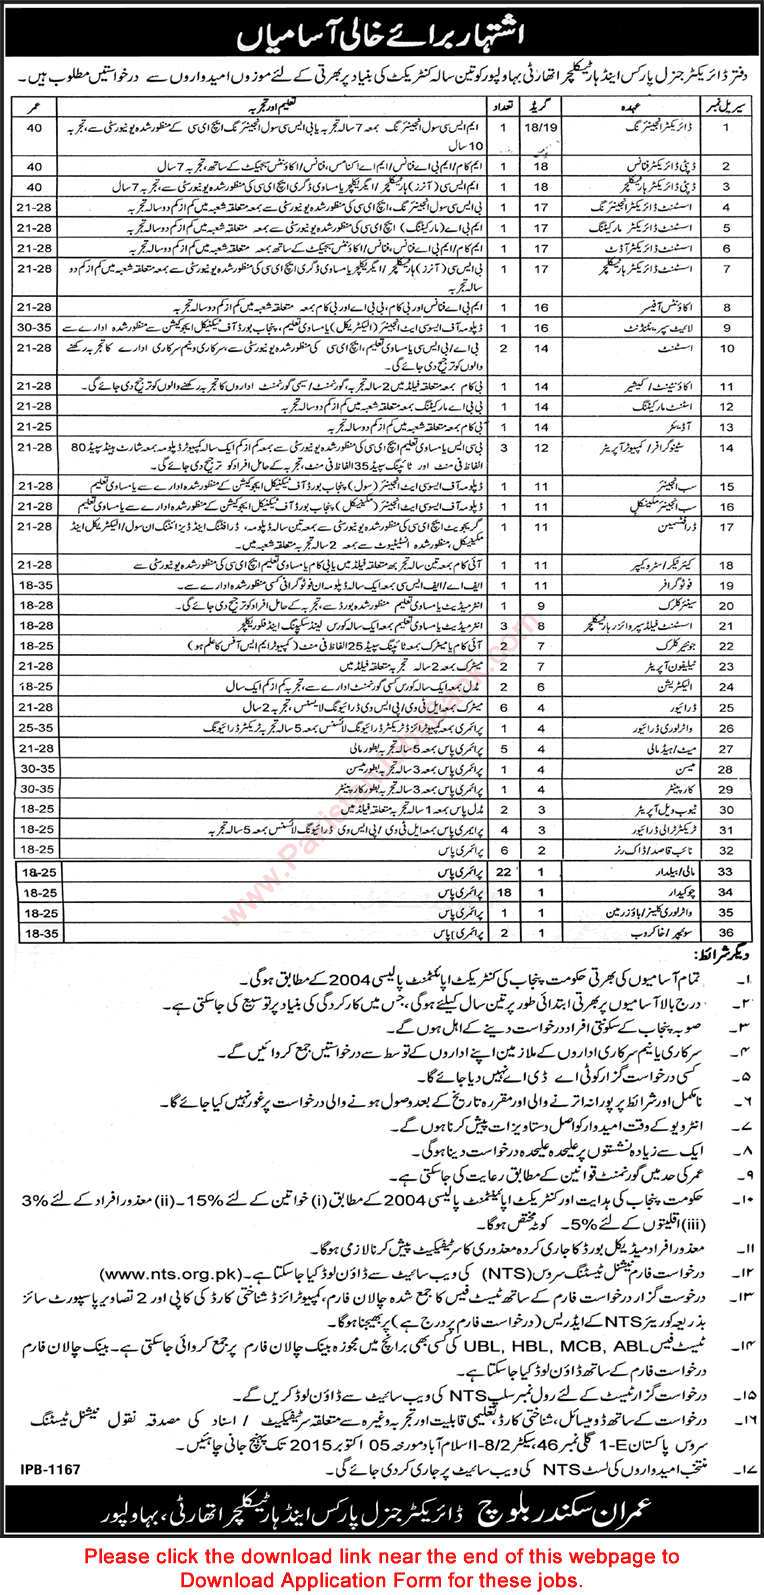 Parks and Horticulture Authority Bahawalpur Jobs 2015 September NTS Application Form Download